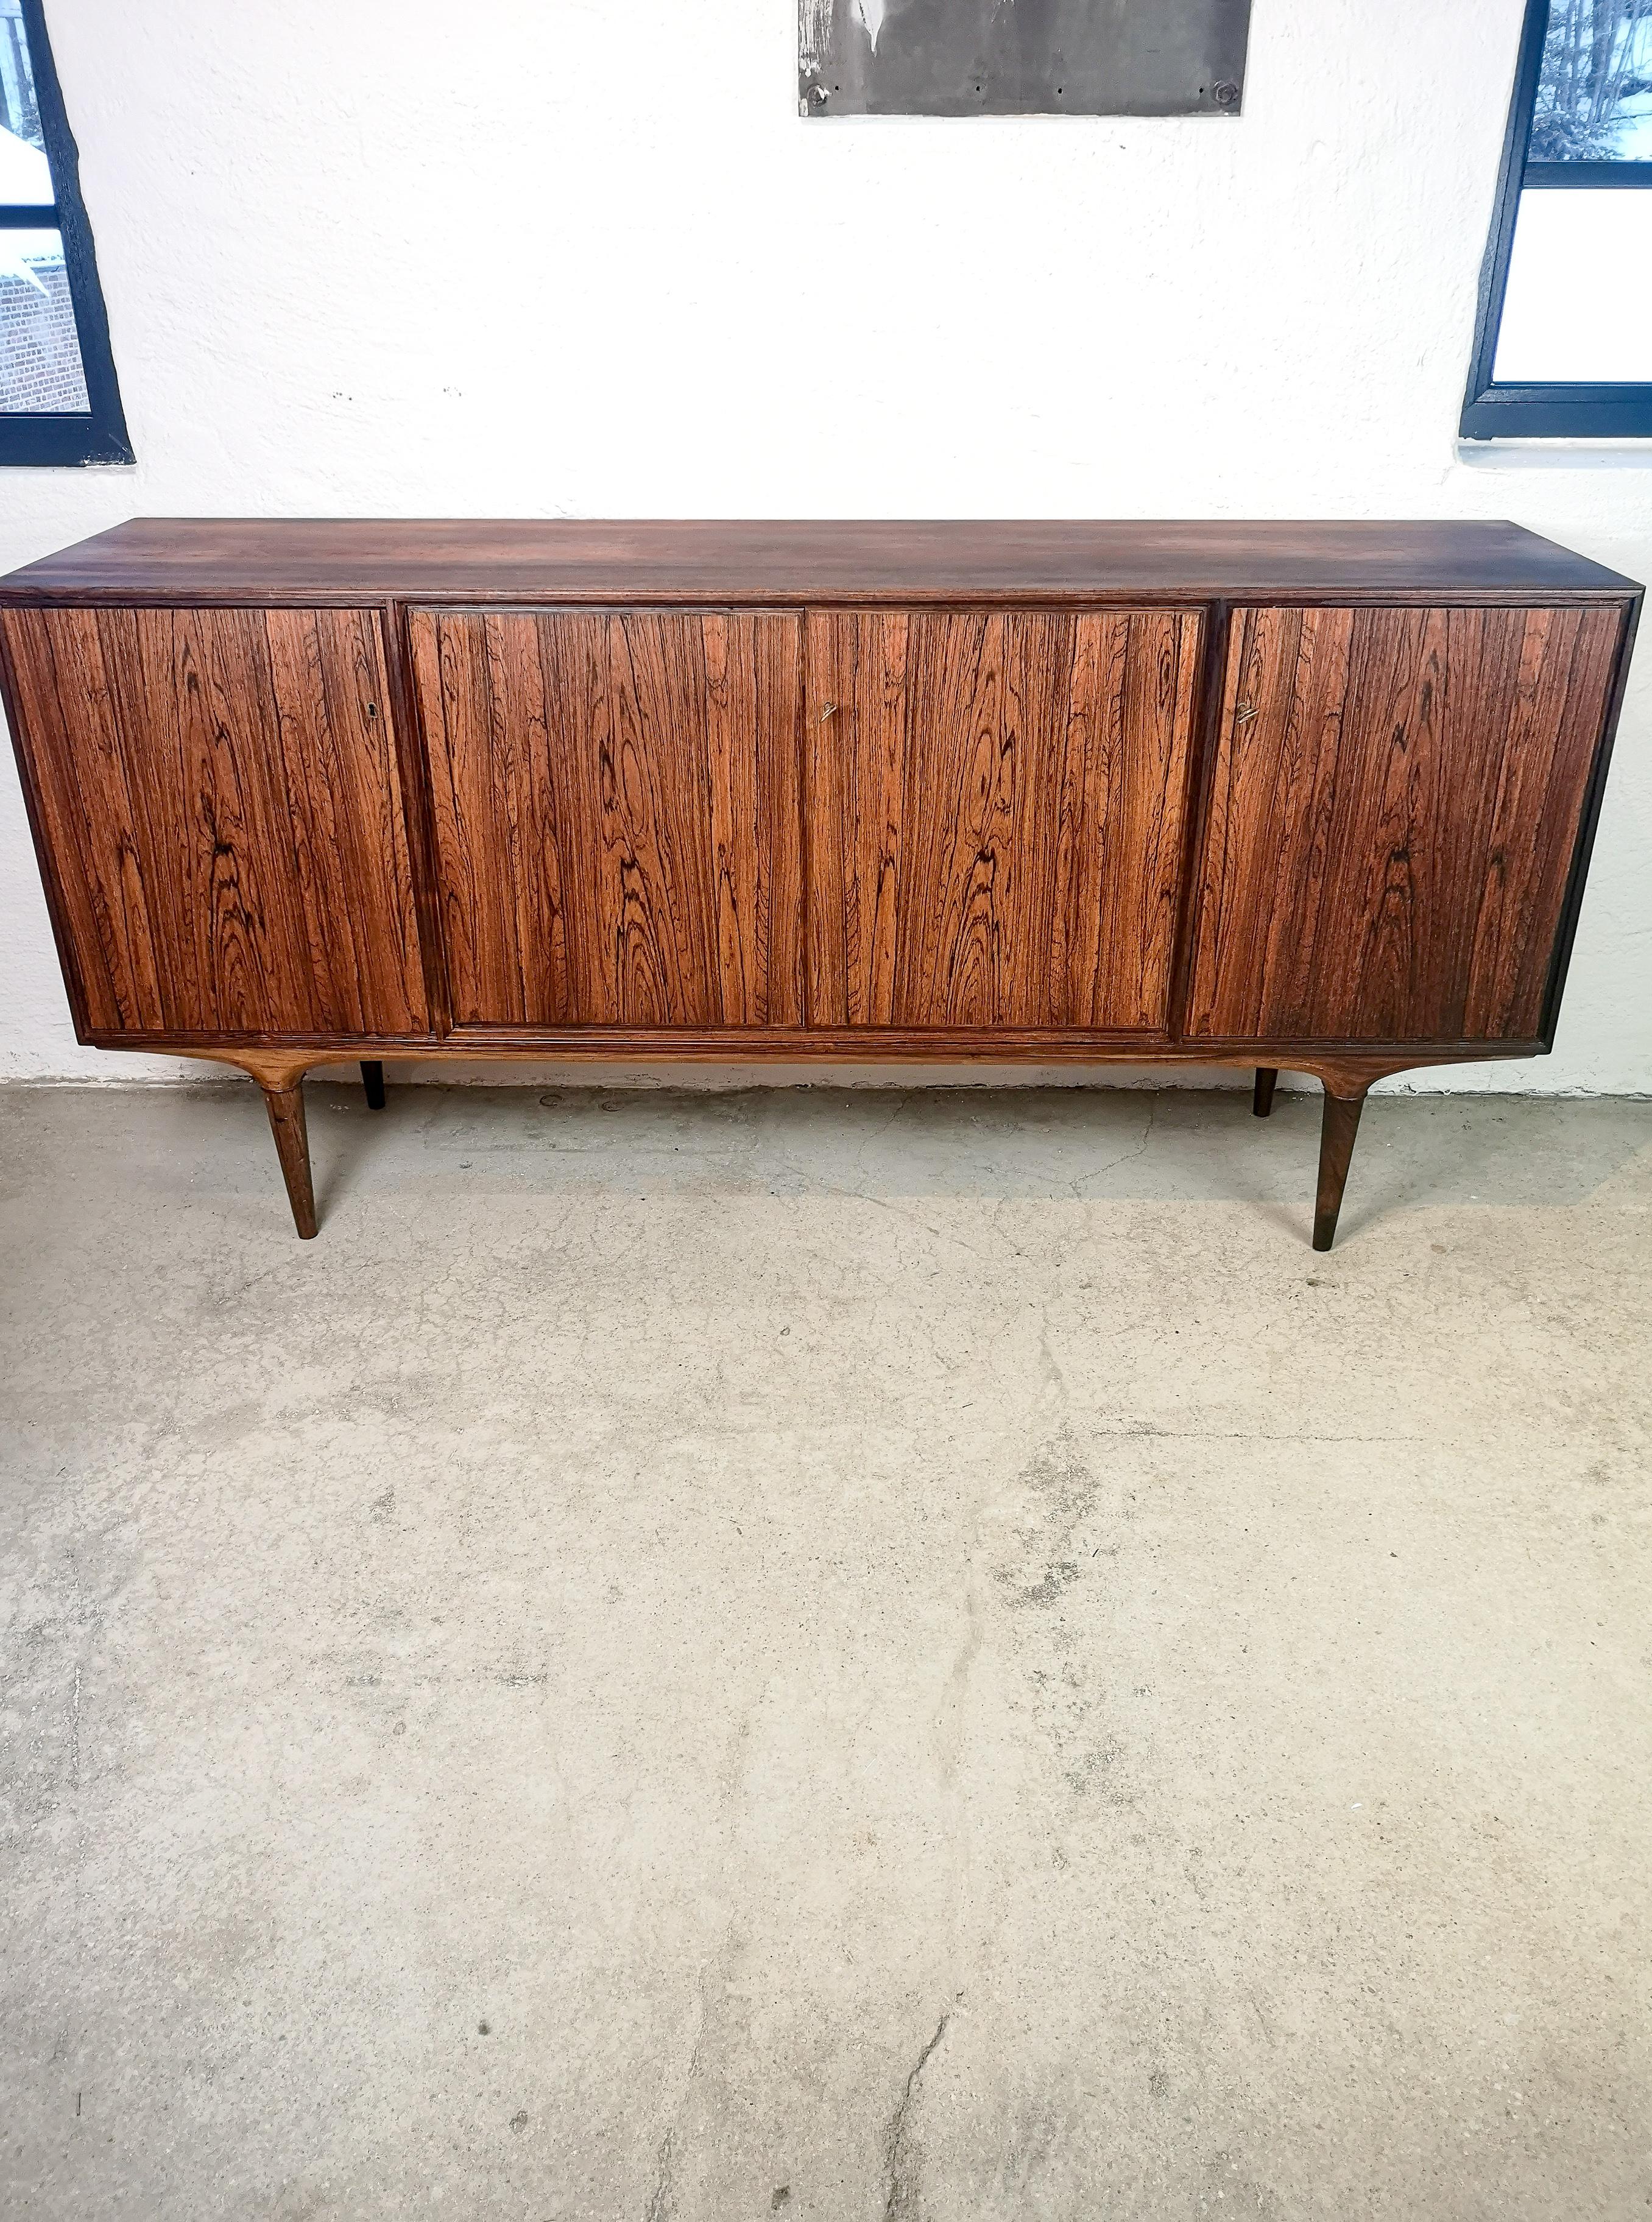 Nice sideboard in rosewood. Made at Seffle Möbelfabrik and designed by Svante Skogh in Sweden, 1960s.
The sideboard is made from rosewood with nice lines across the piece. This one has not brass rings at the legs as most of them have. Instead its